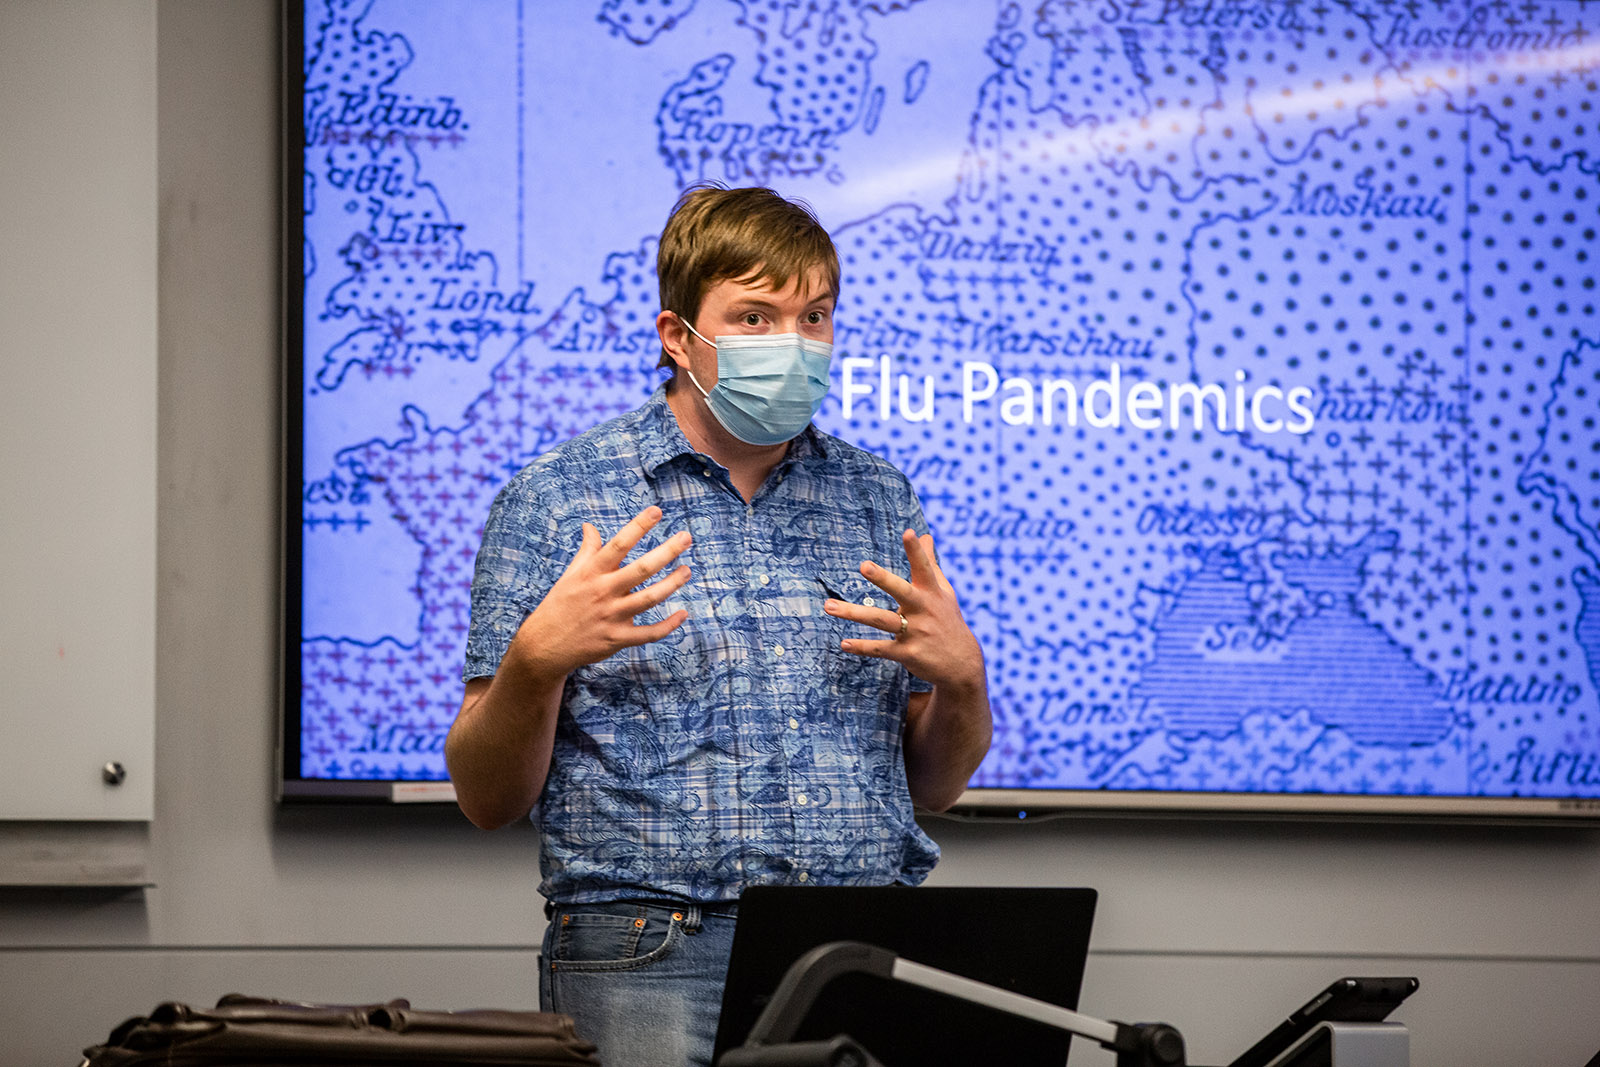 History and Biology Professors Collaborate on Pandemic Curriculum